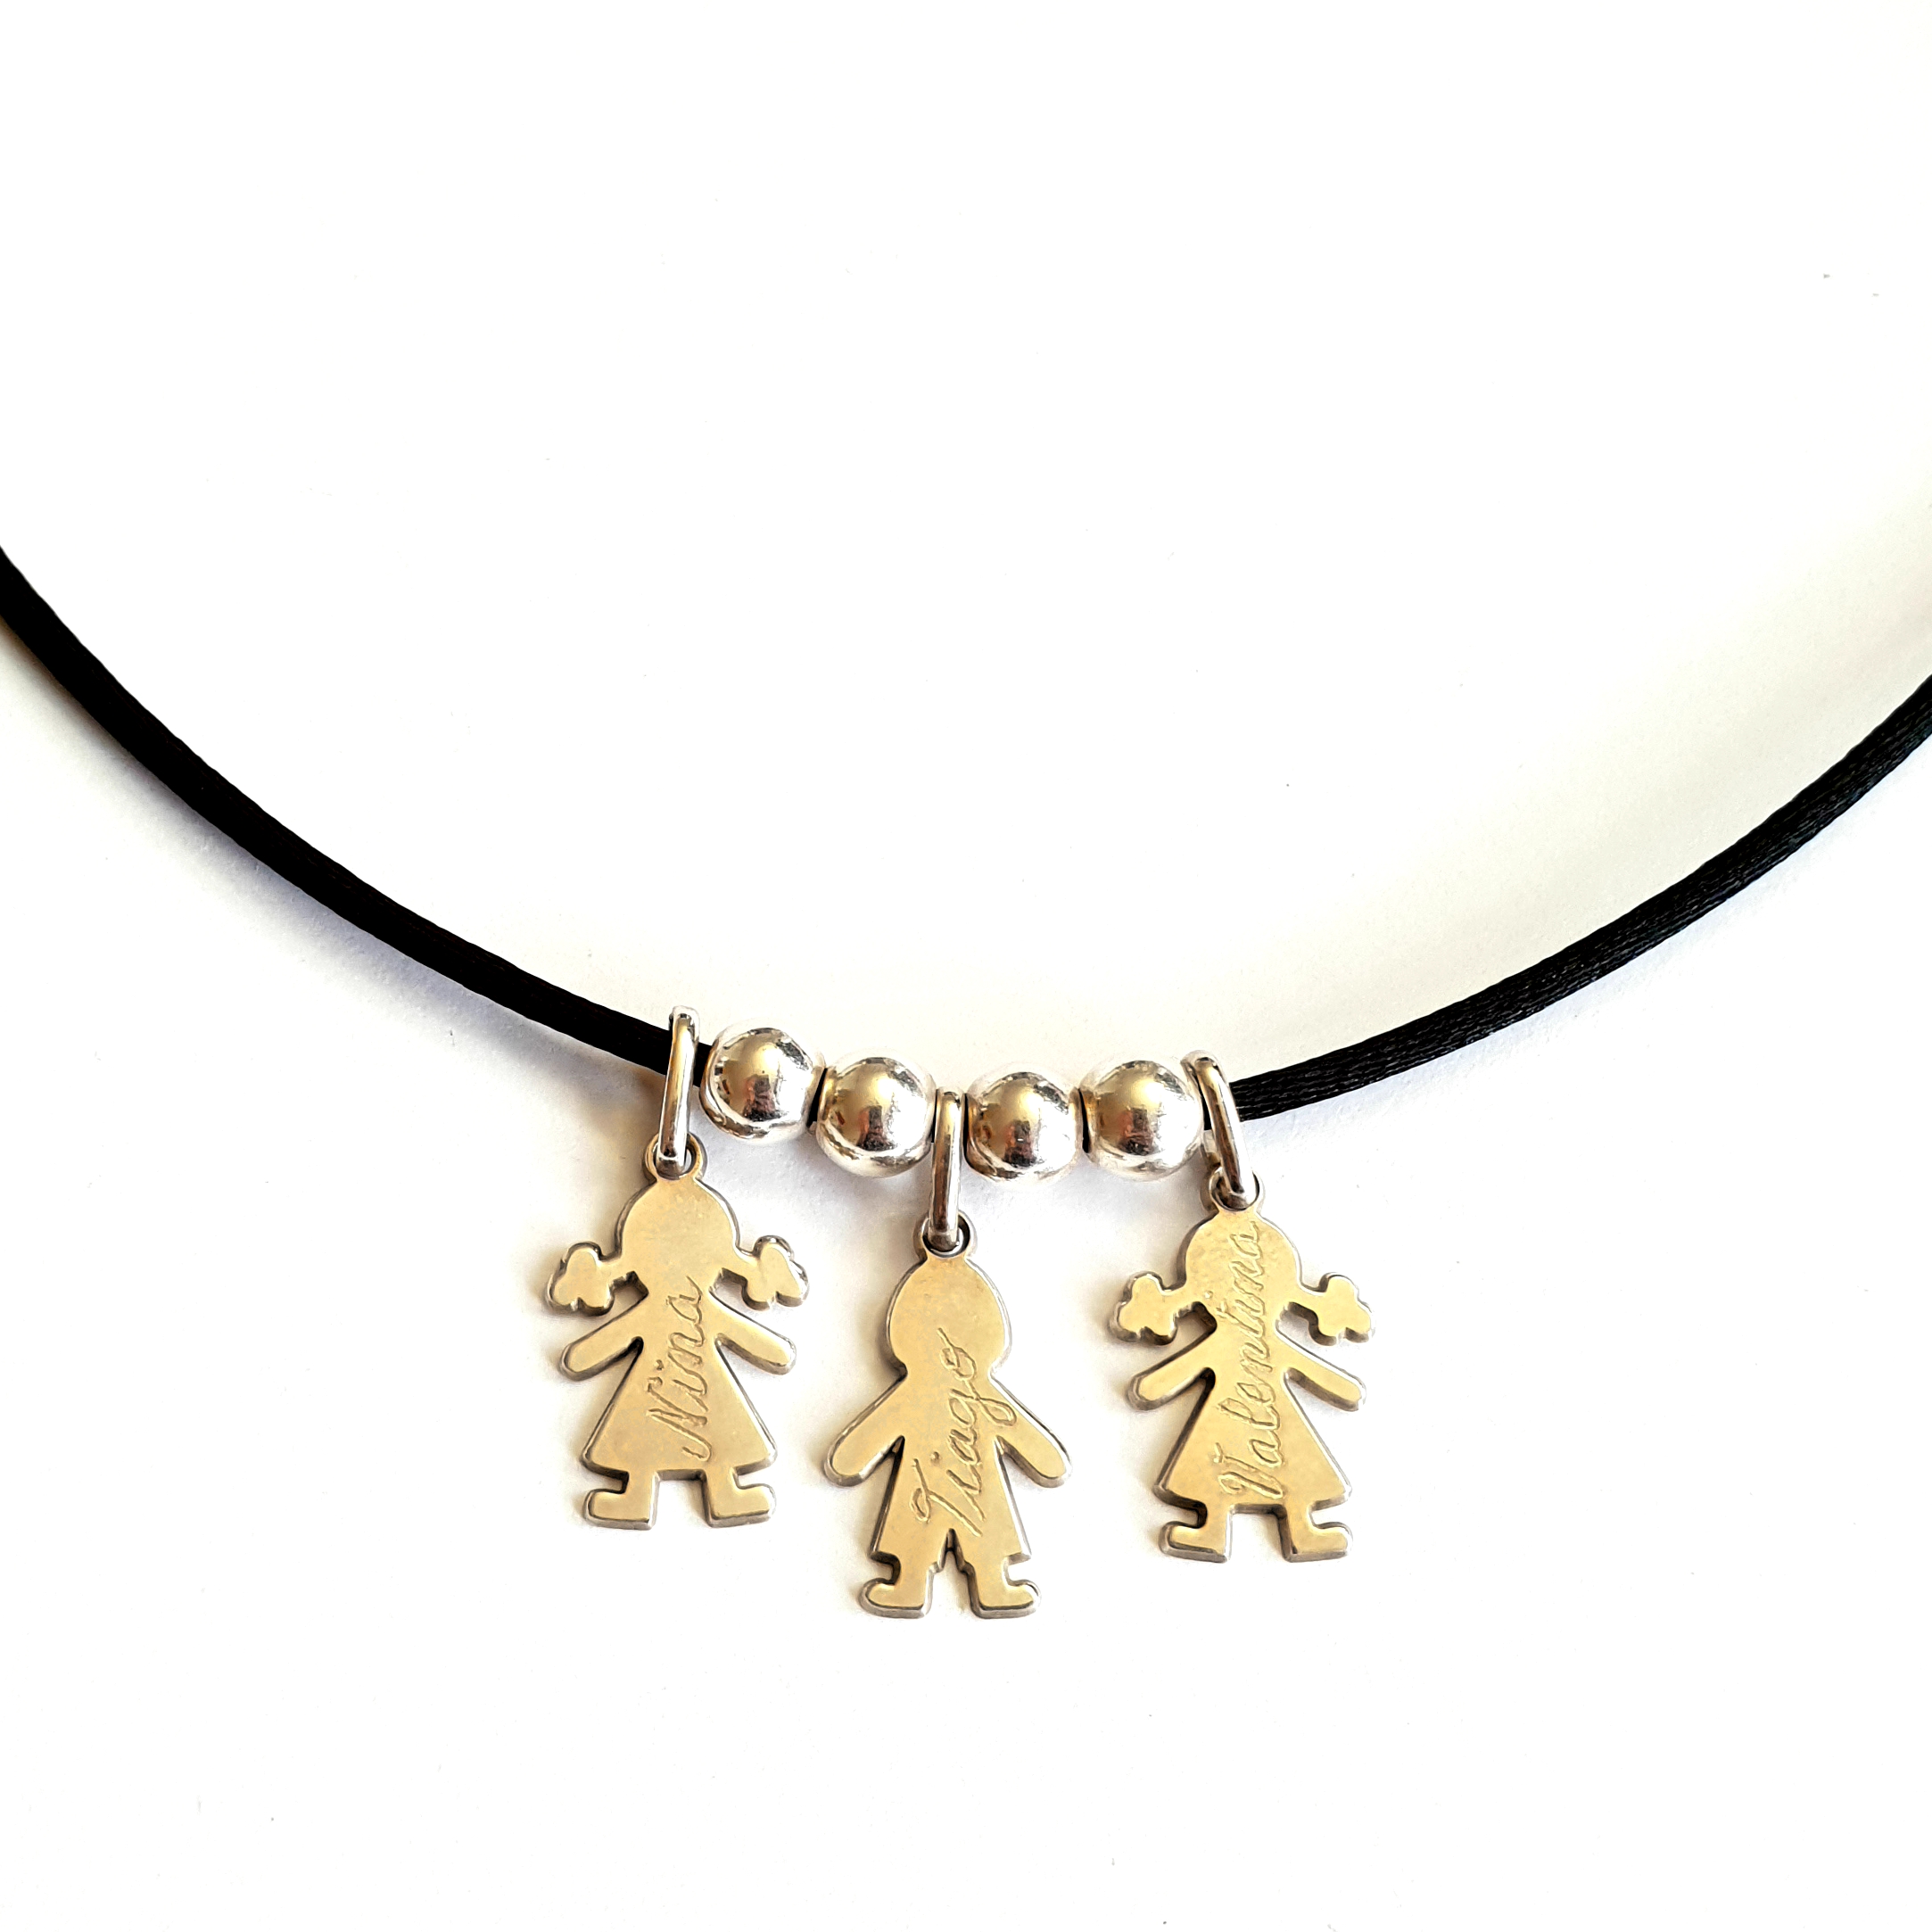 ancien-collier-3-personnages.jpg